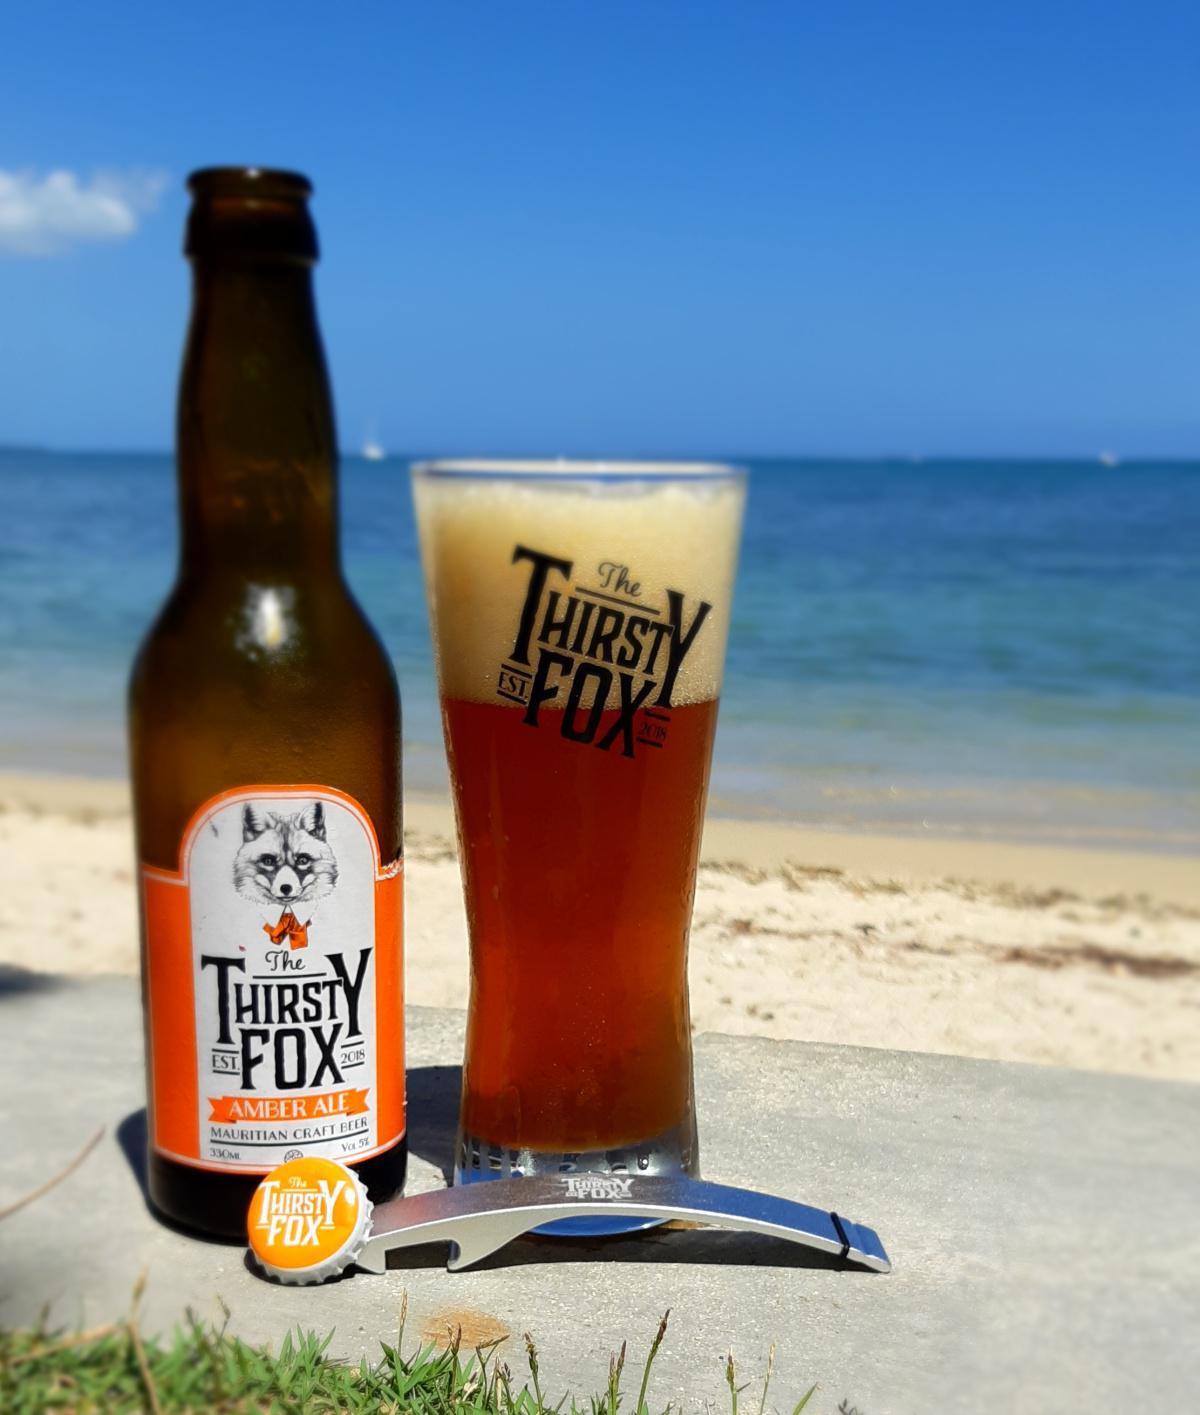 The Thirsty Fox: A fine Mauritian tale of malt and hops